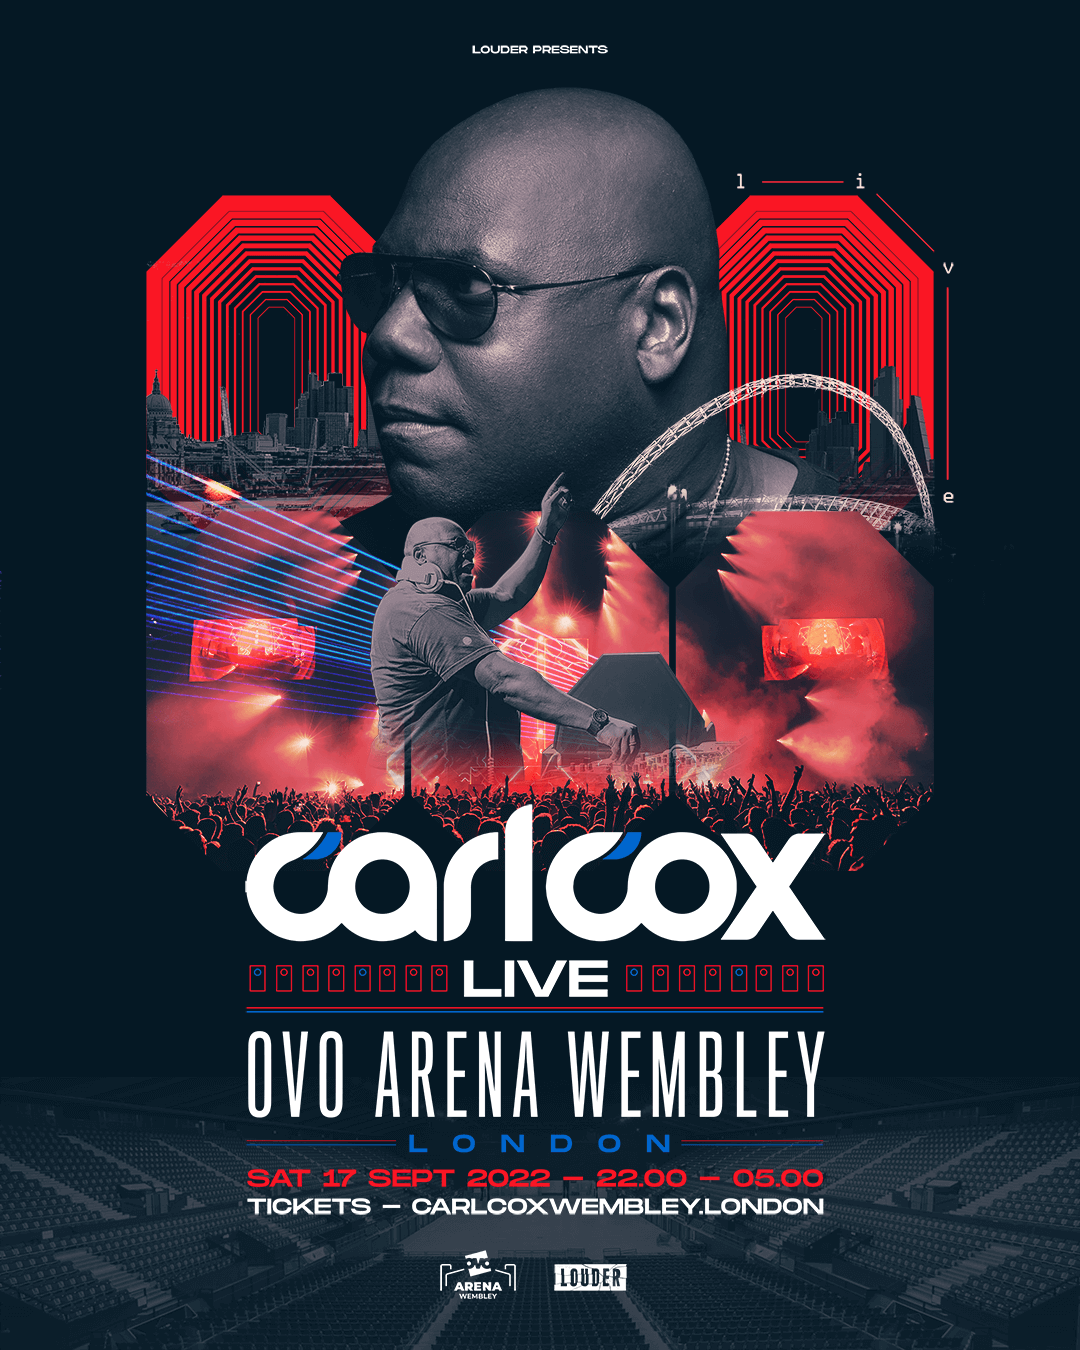 A special show for the iconic Carl Cox